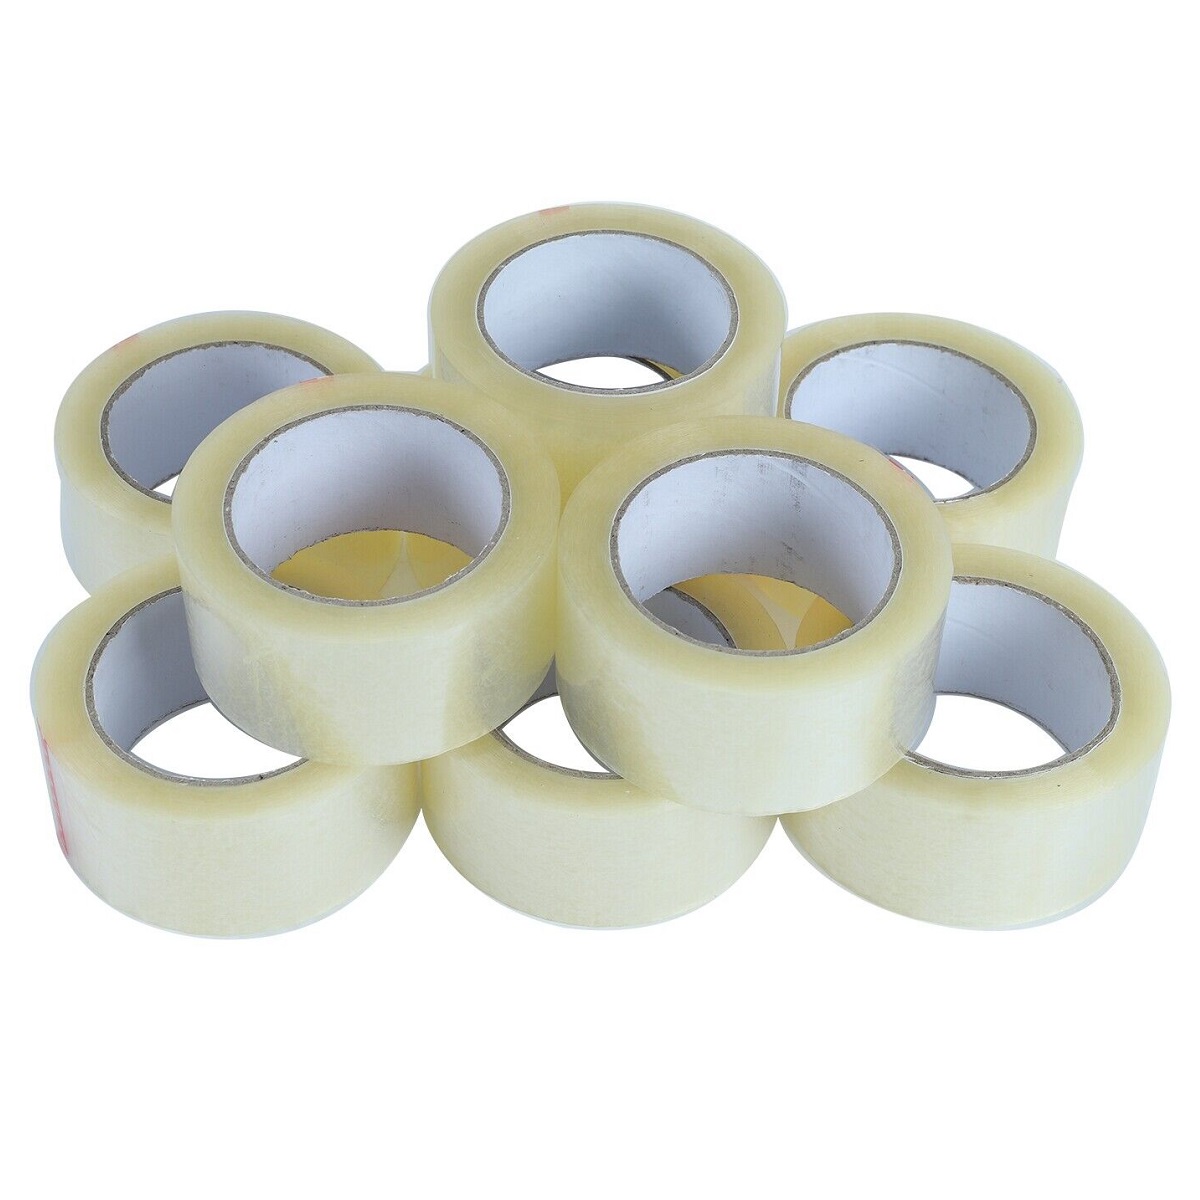 36 Rolls Clear Packing Tape 2.0 Mil Box Shipping Packaging Tape